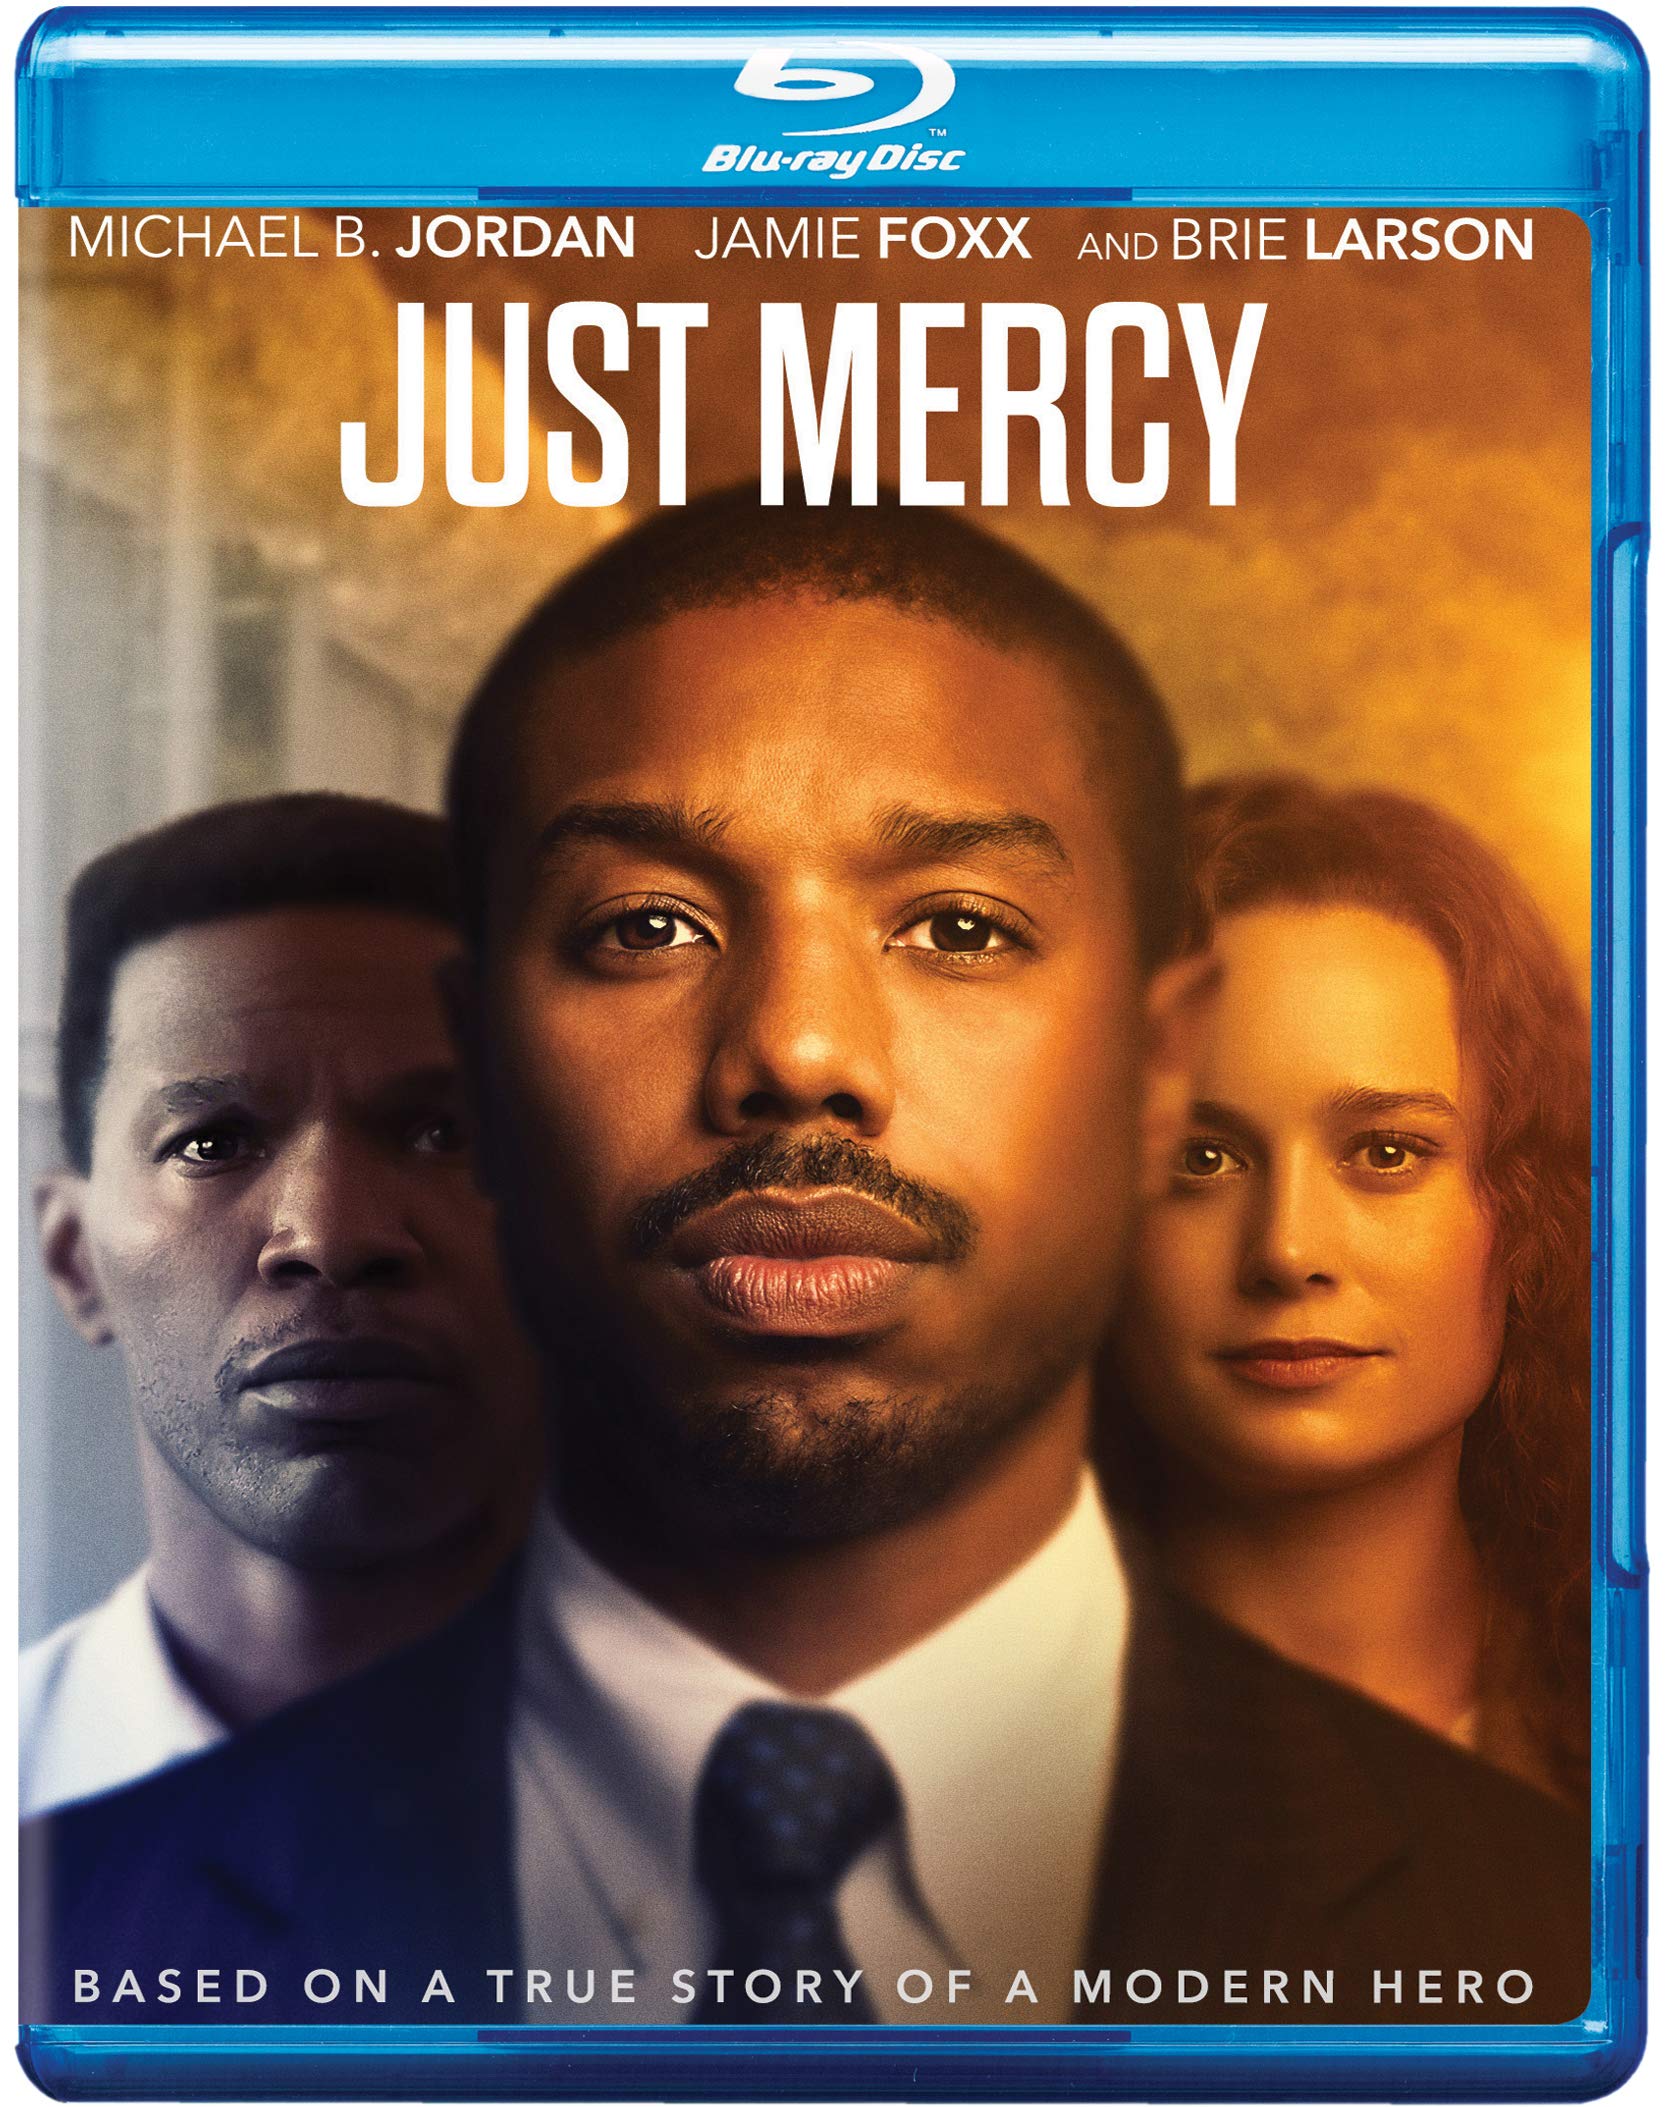 just-mercy-movie-purchase-or-watch-online